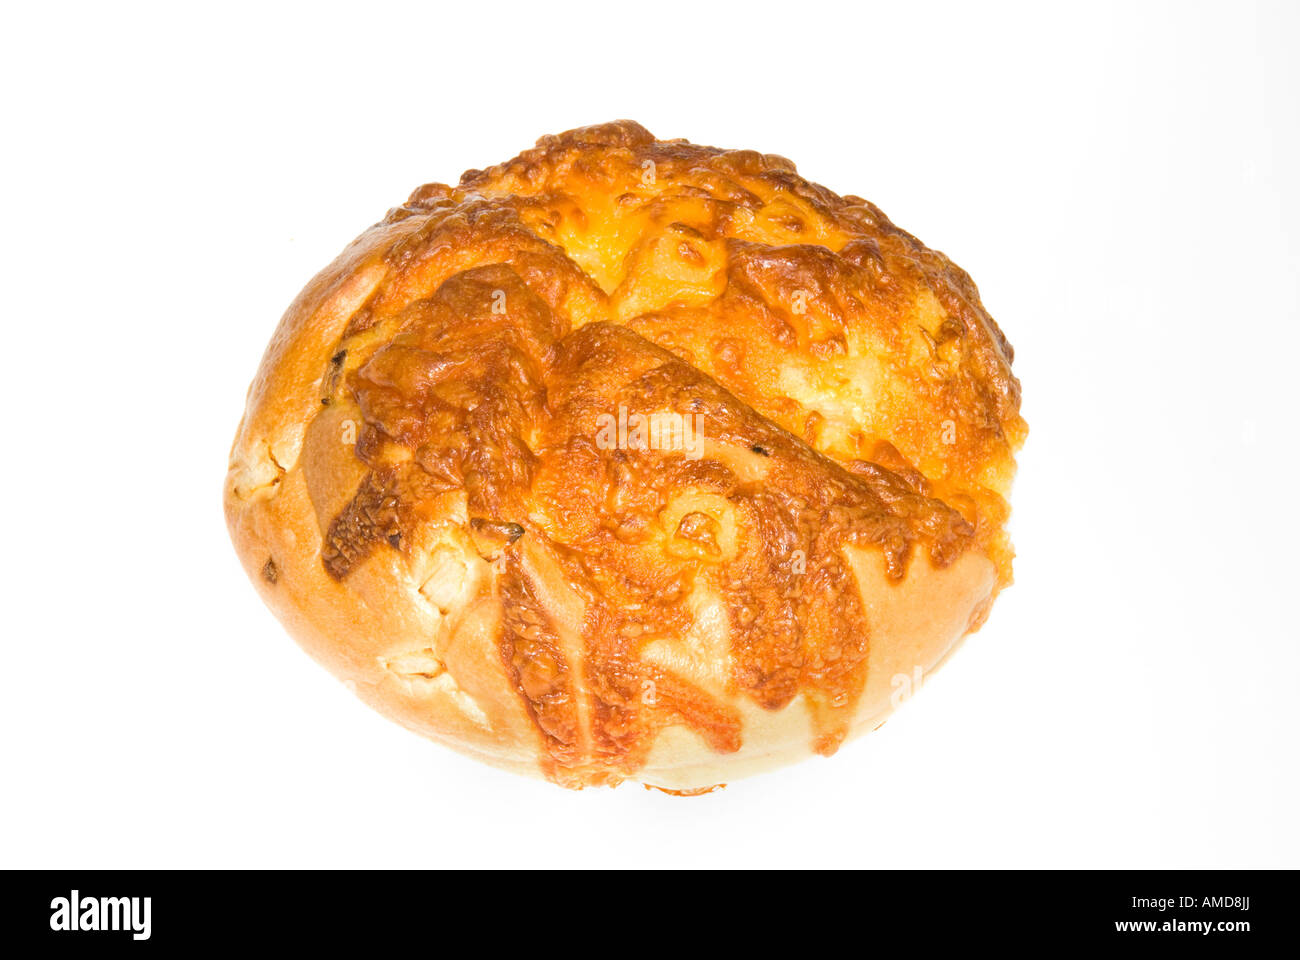 A freshly baked cheese roll shows its beautiful orange color and scrumptious look Stock Photo